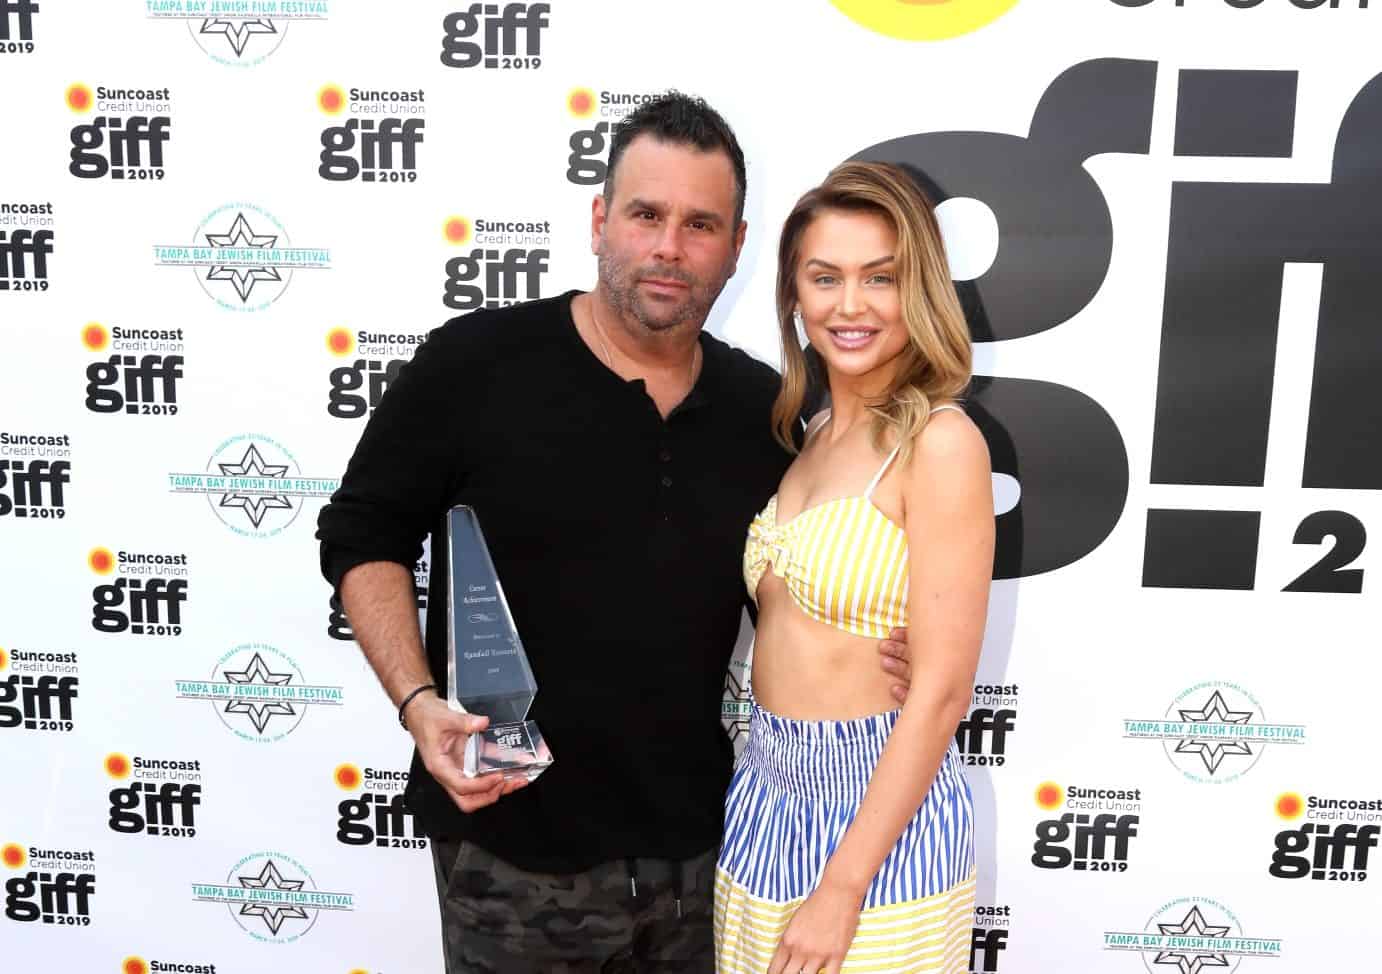 Randall Emmett Says He’s Wants Fiance Lala Kent to “Slow Down” With Plans for Baby No.2 as He Dishes on Sex Life After Welcoming Daughter, Plus Filming With Ocean on Vanderpump Rules